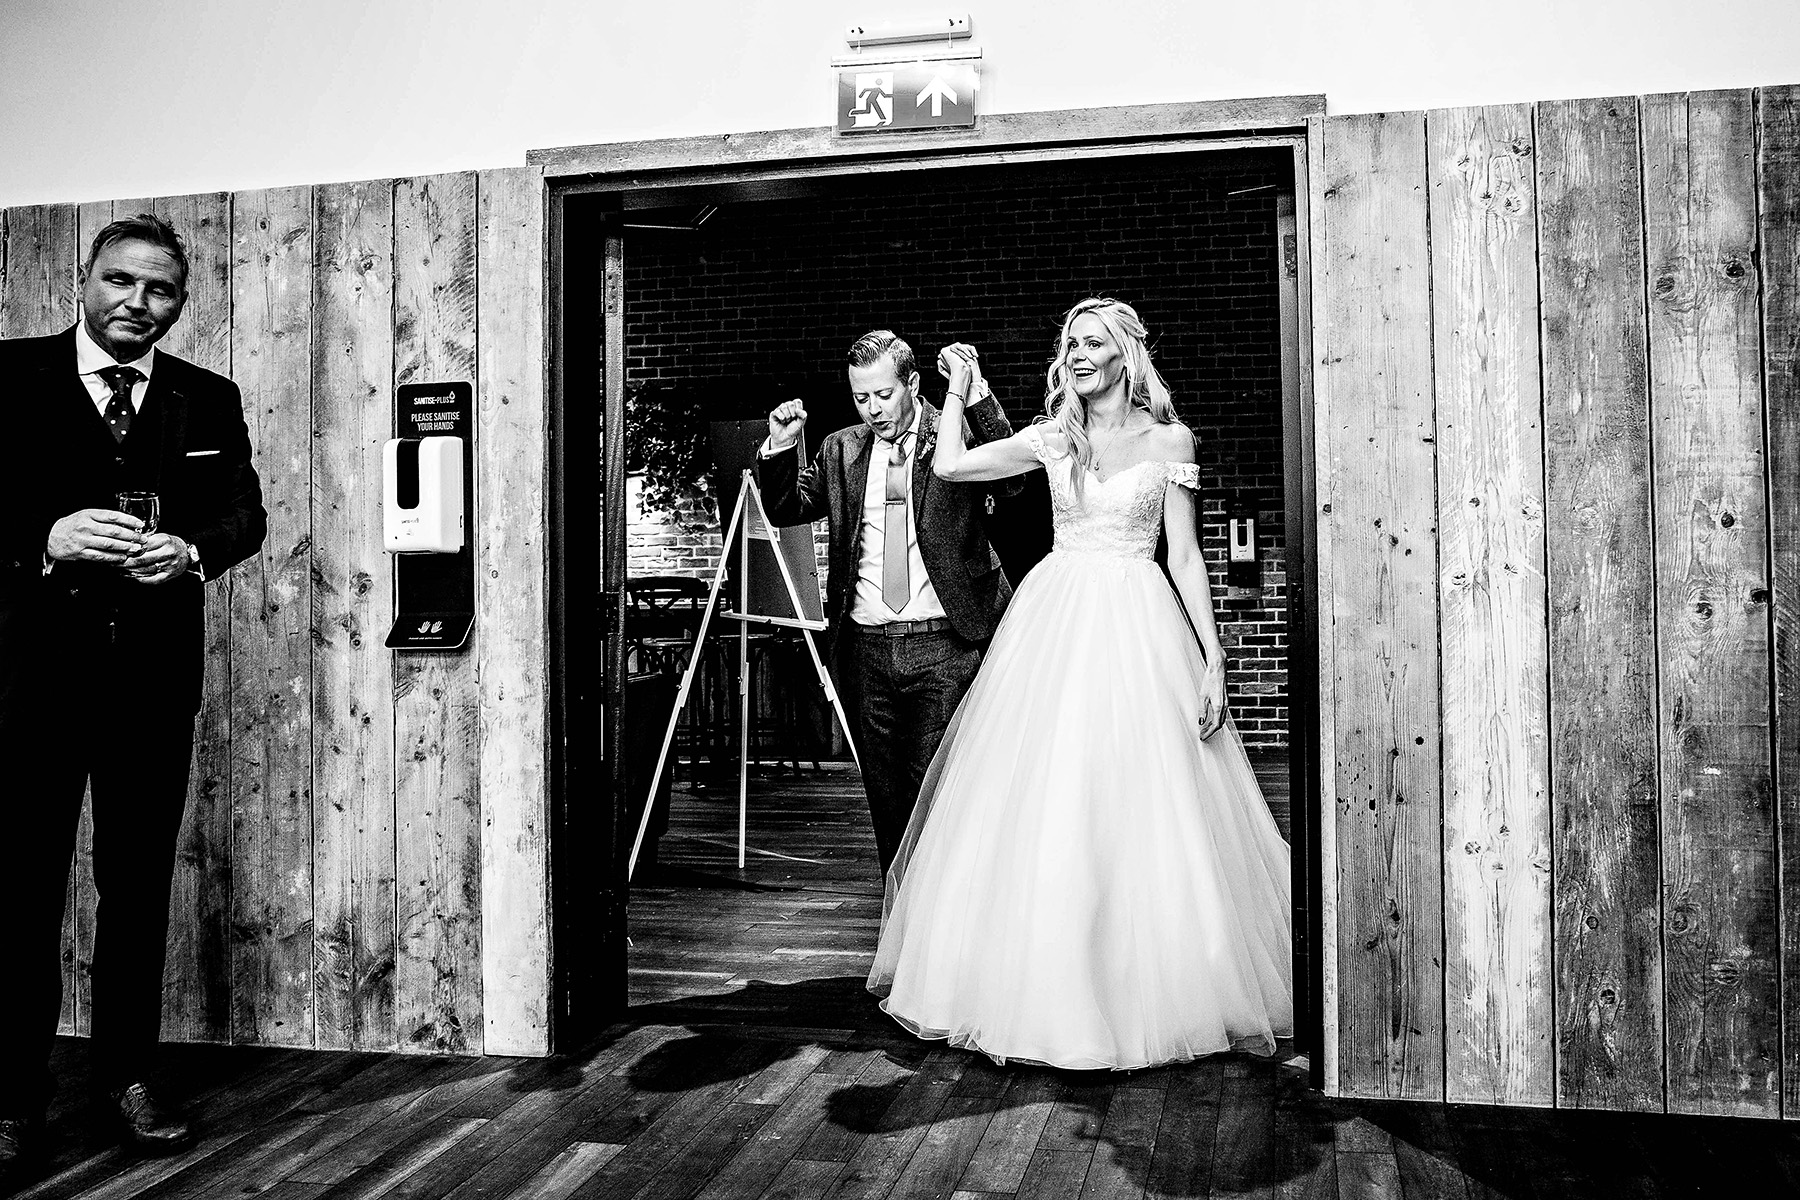 The bride and groom enter the barns